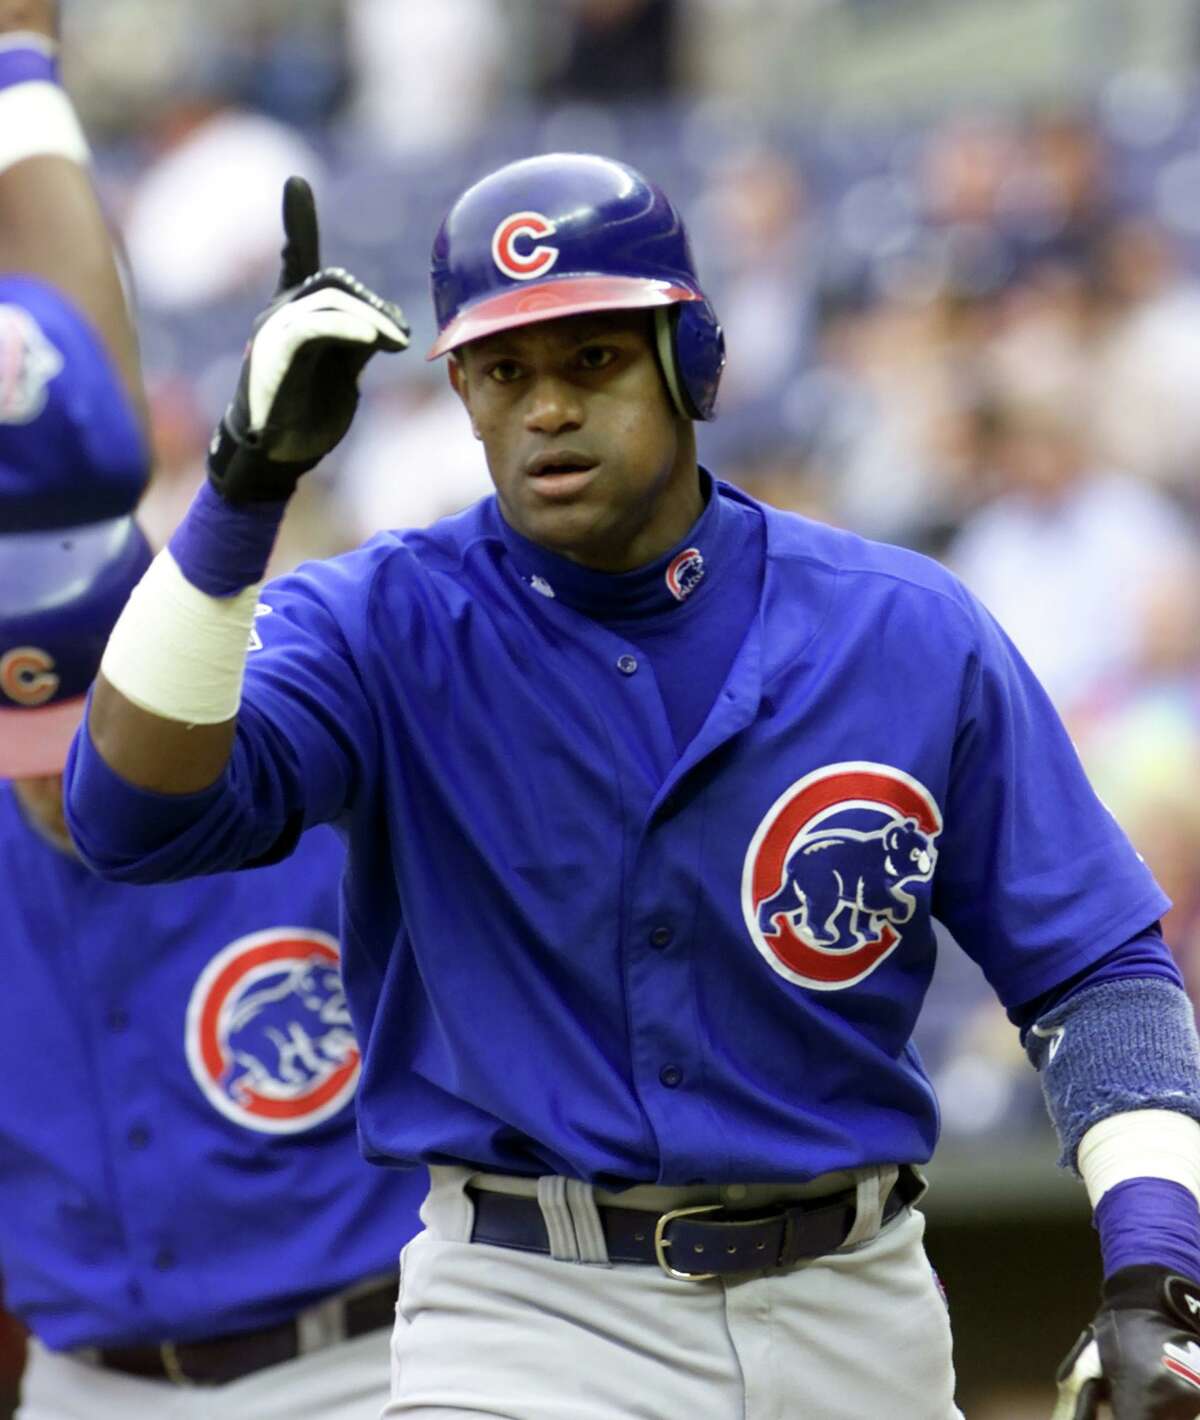 Chicago Cubs' Sammy Sosa celebrates after hitting a two-run home run off Cincinnati Reds pitcher Chris Rietsma in the first inning, Wednesday, May 30, 2001, in Cincinnati. (AP Photo/Al Behrman)